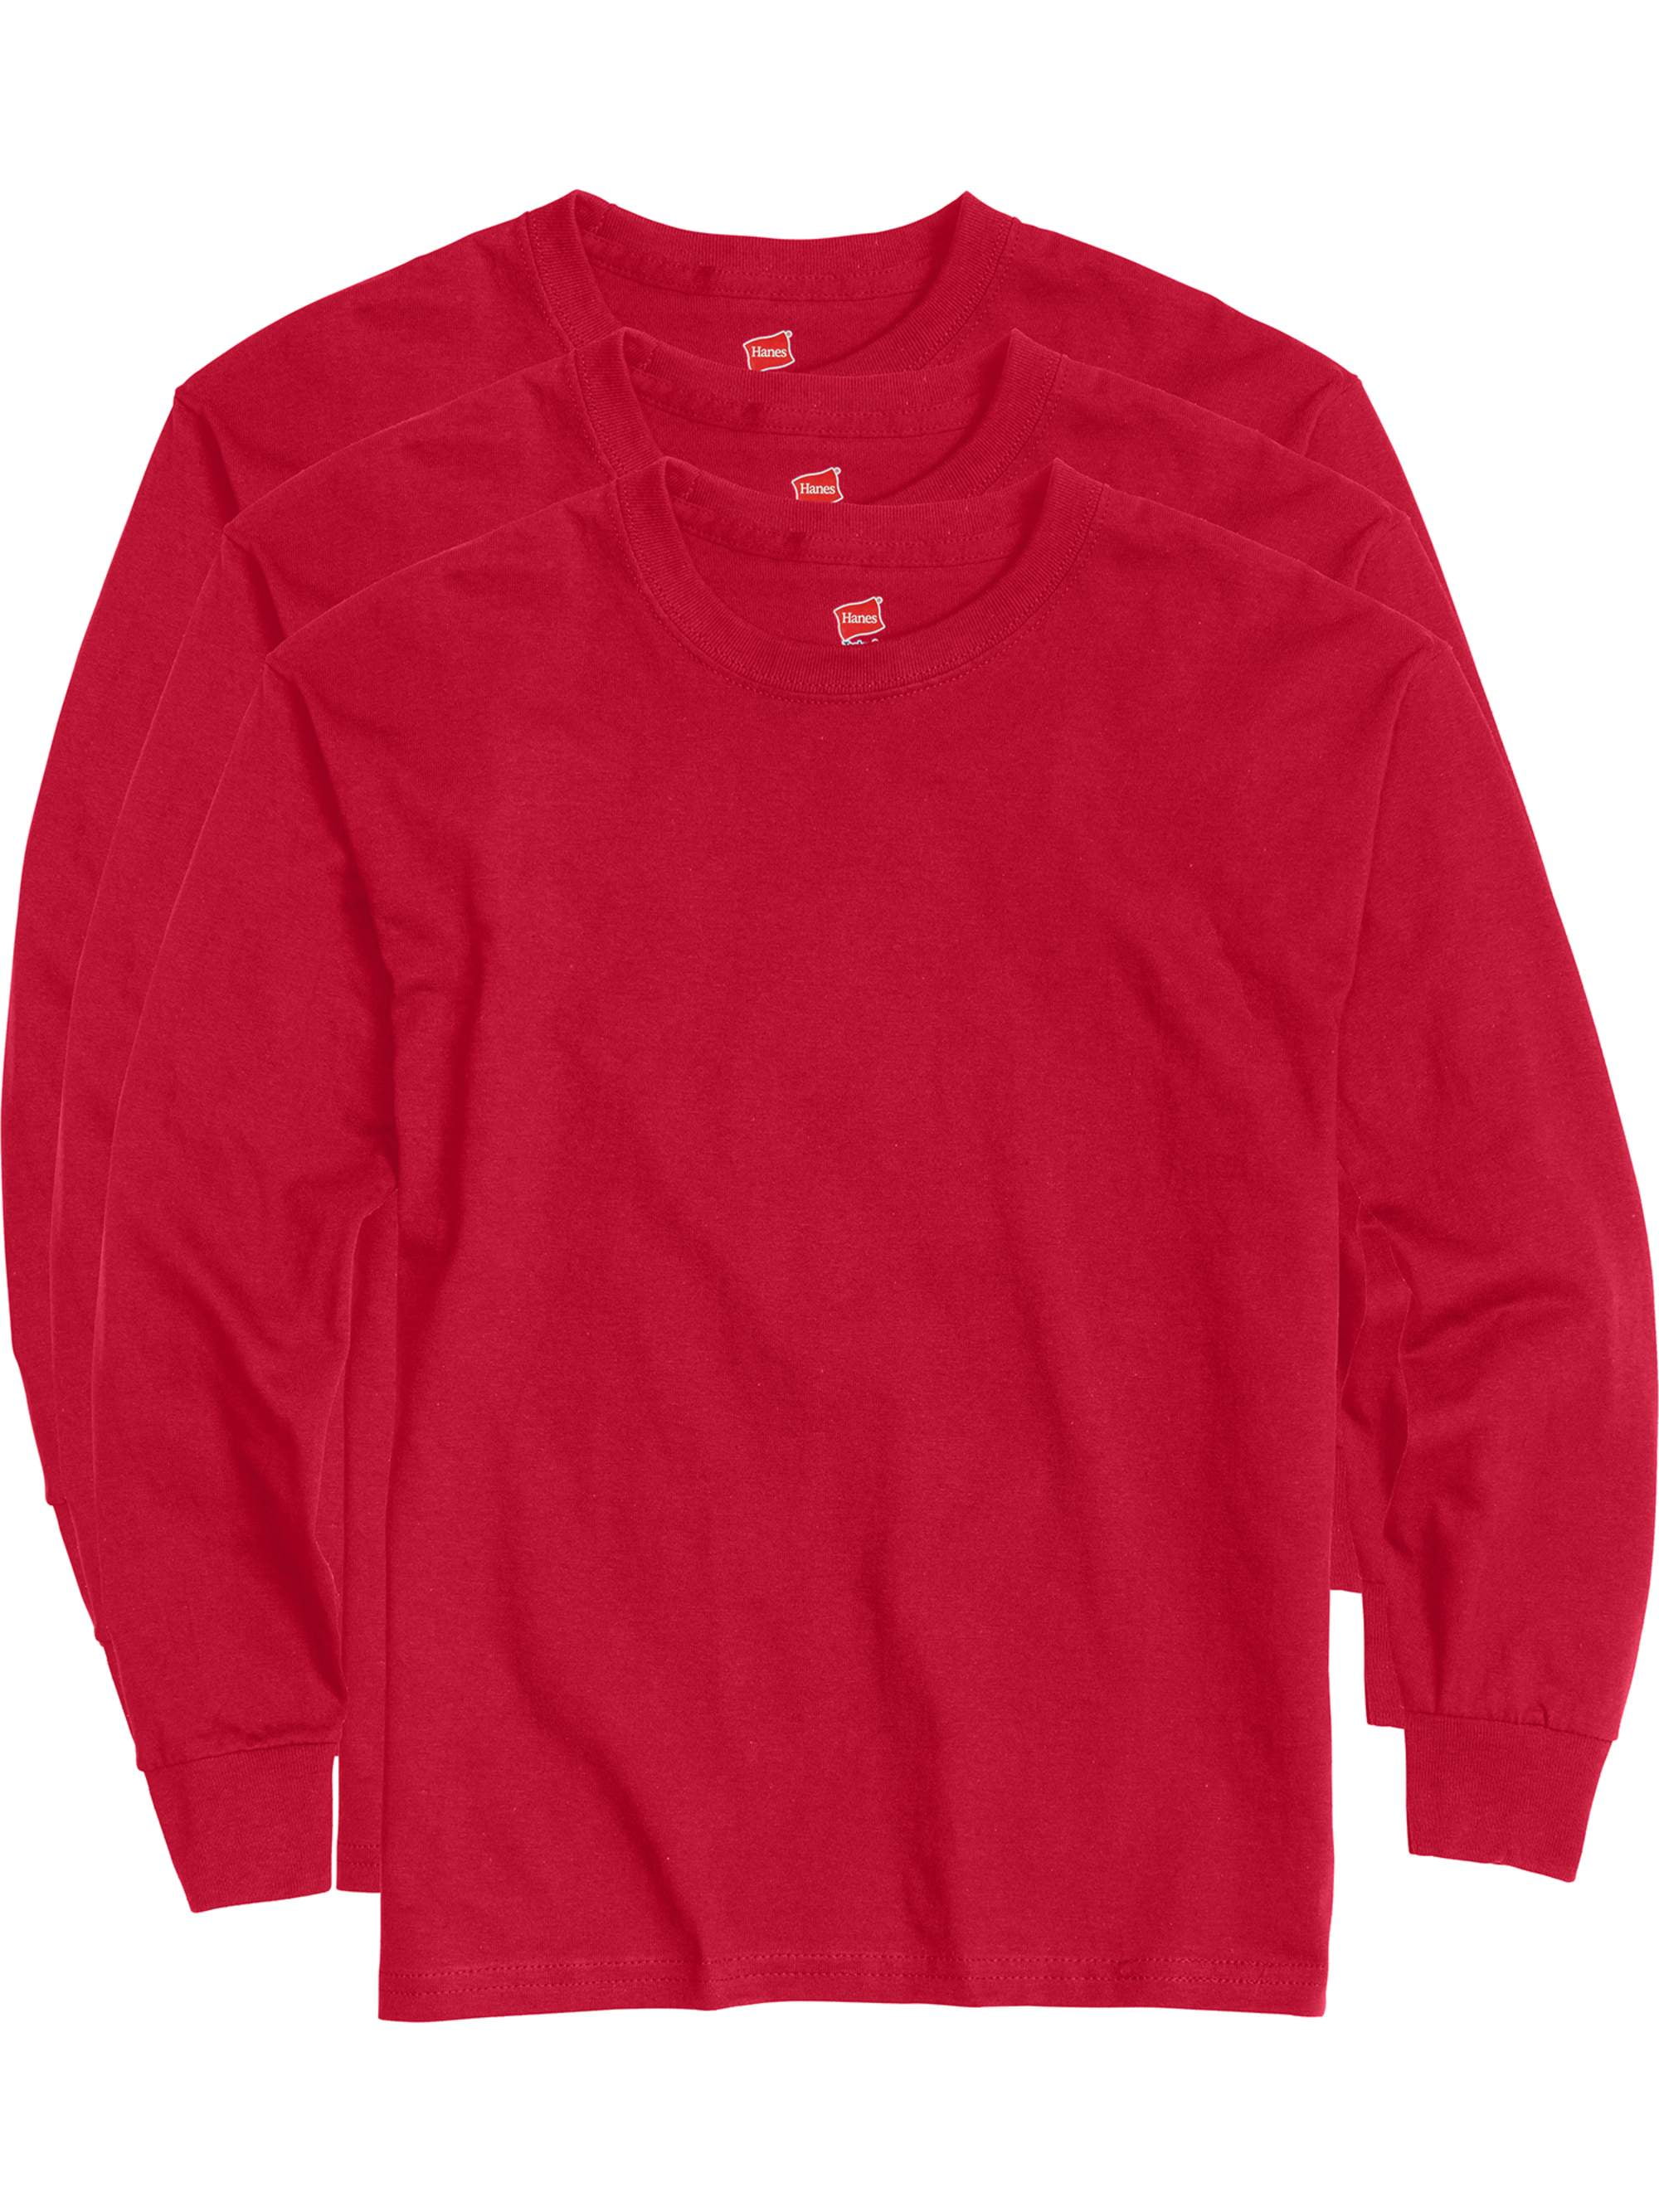 Baby Boys Kids Red for My Brother ComfortSoft Long Sleeve T-Shirt